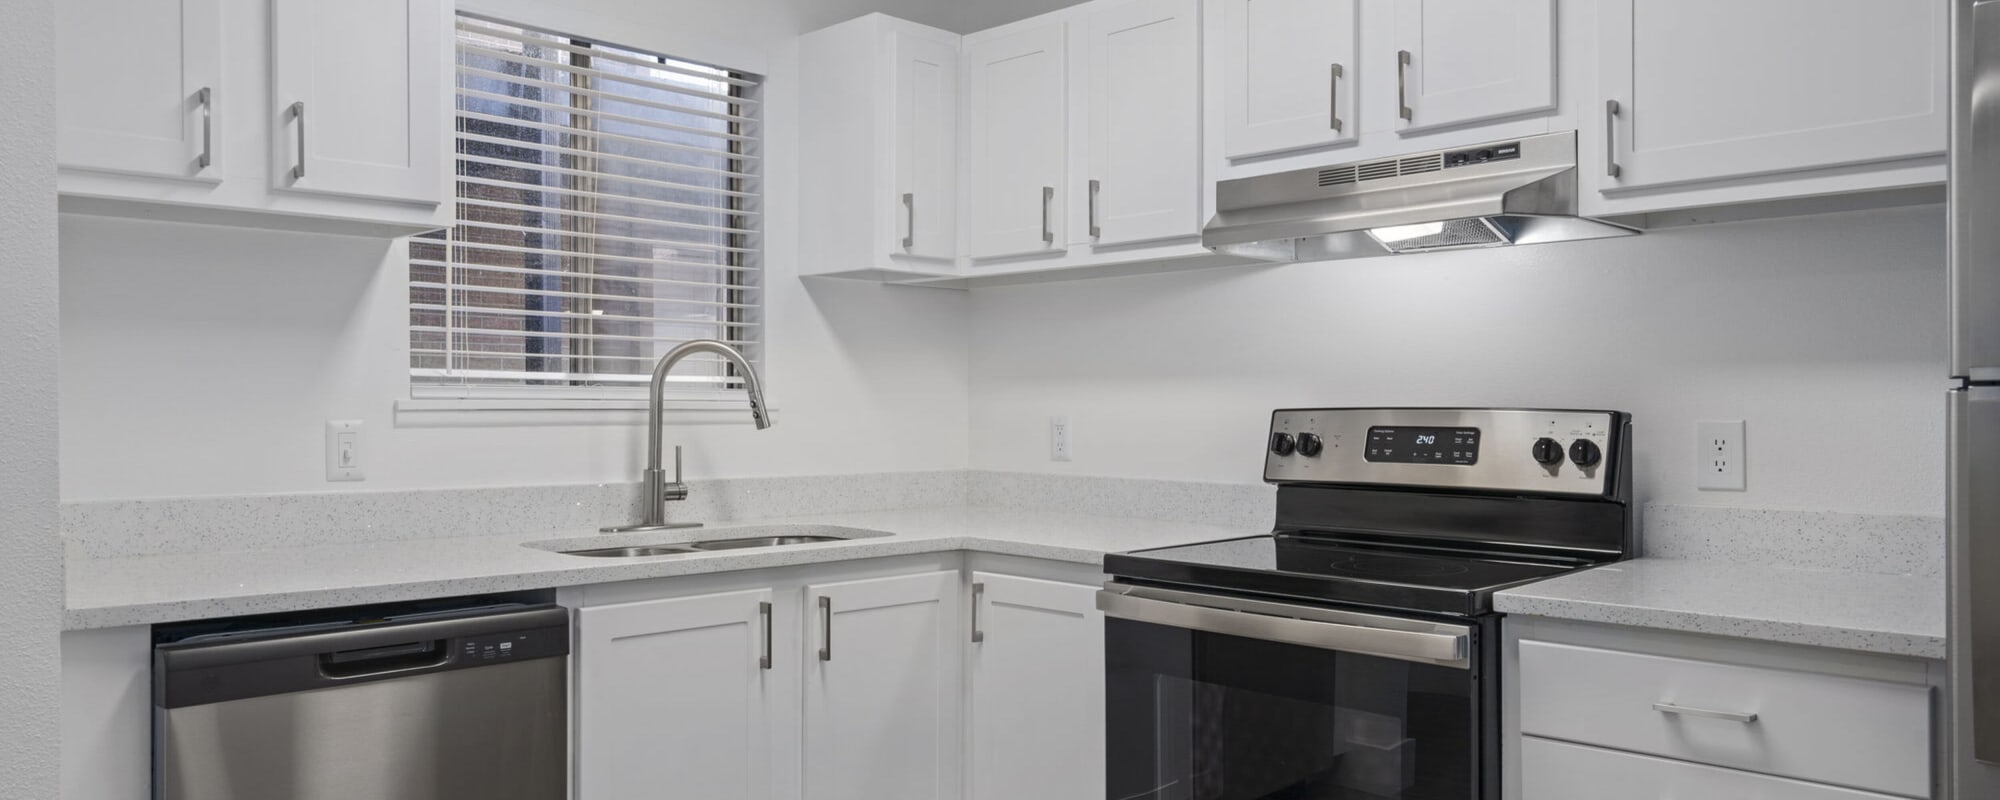 Model kitchen with white accents at The Franklyn Apartments in Millcreek, Utah